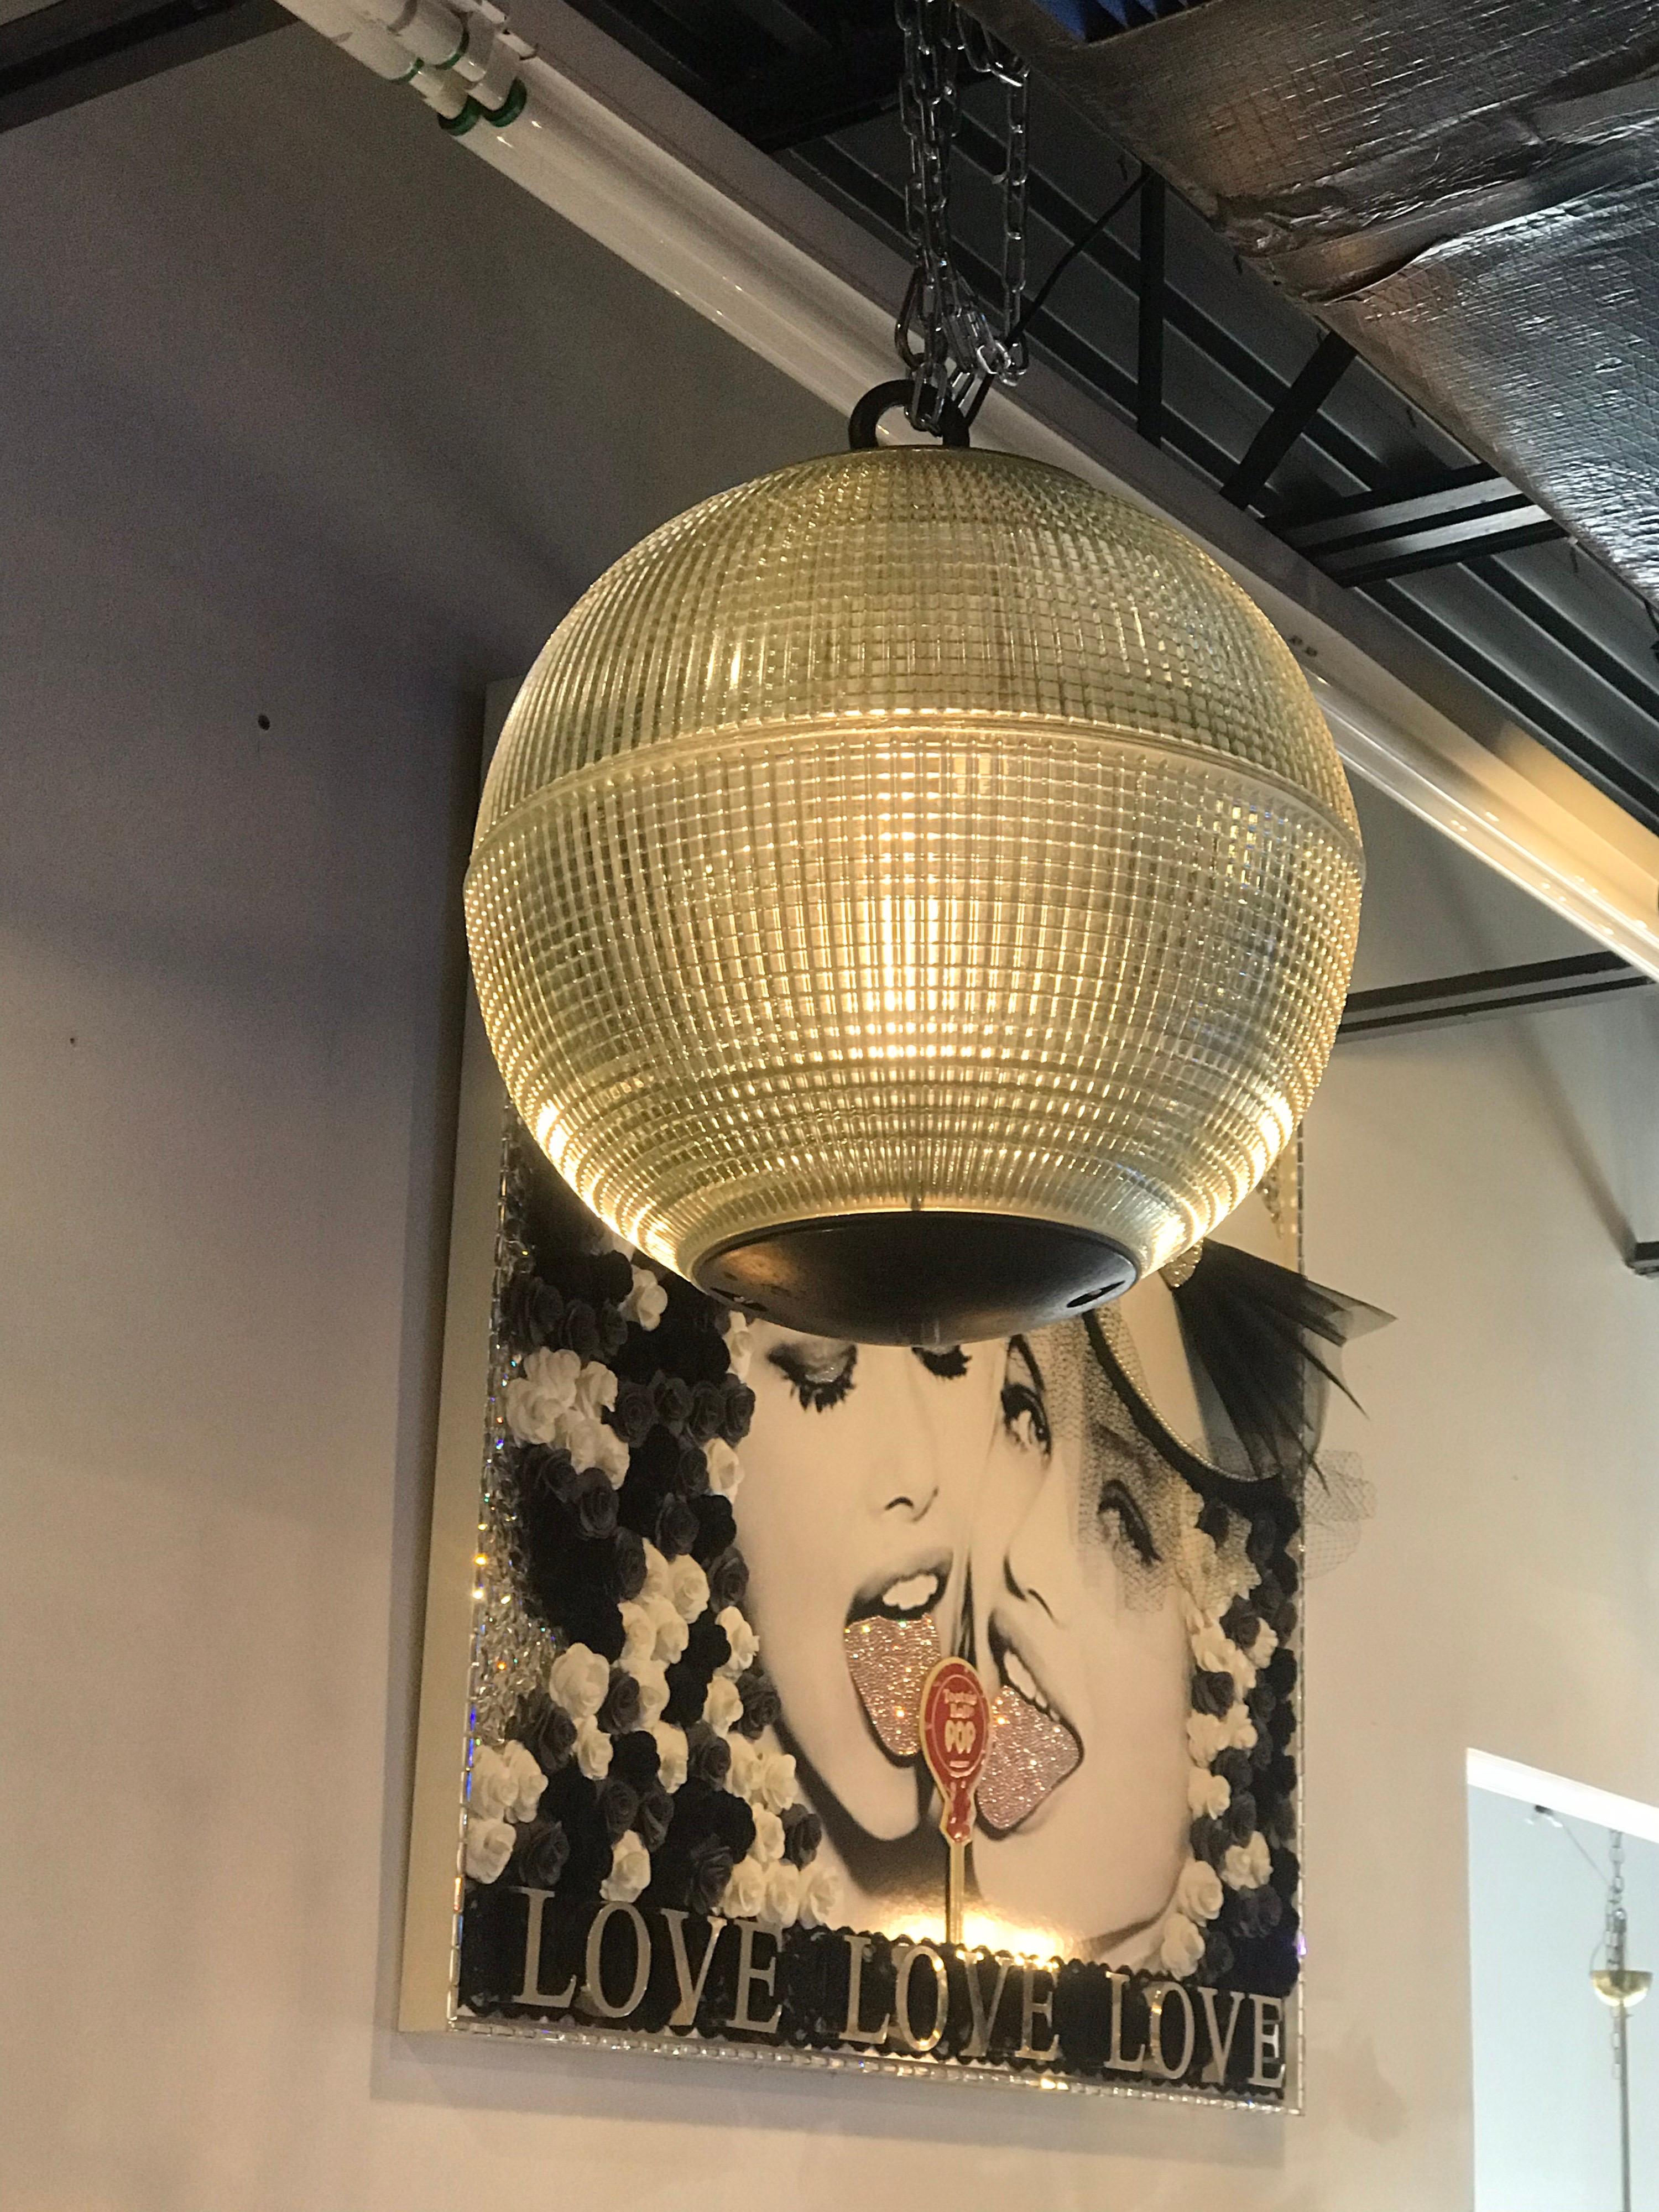 A wonderful very large spherical globe, originally a Paris streetlight and transformed into a hanging pendant. The hallmark of Holophane luminaires, or lighting fixtures, is the borosilicate glass reflector/refractor. The glass prisms or ribs